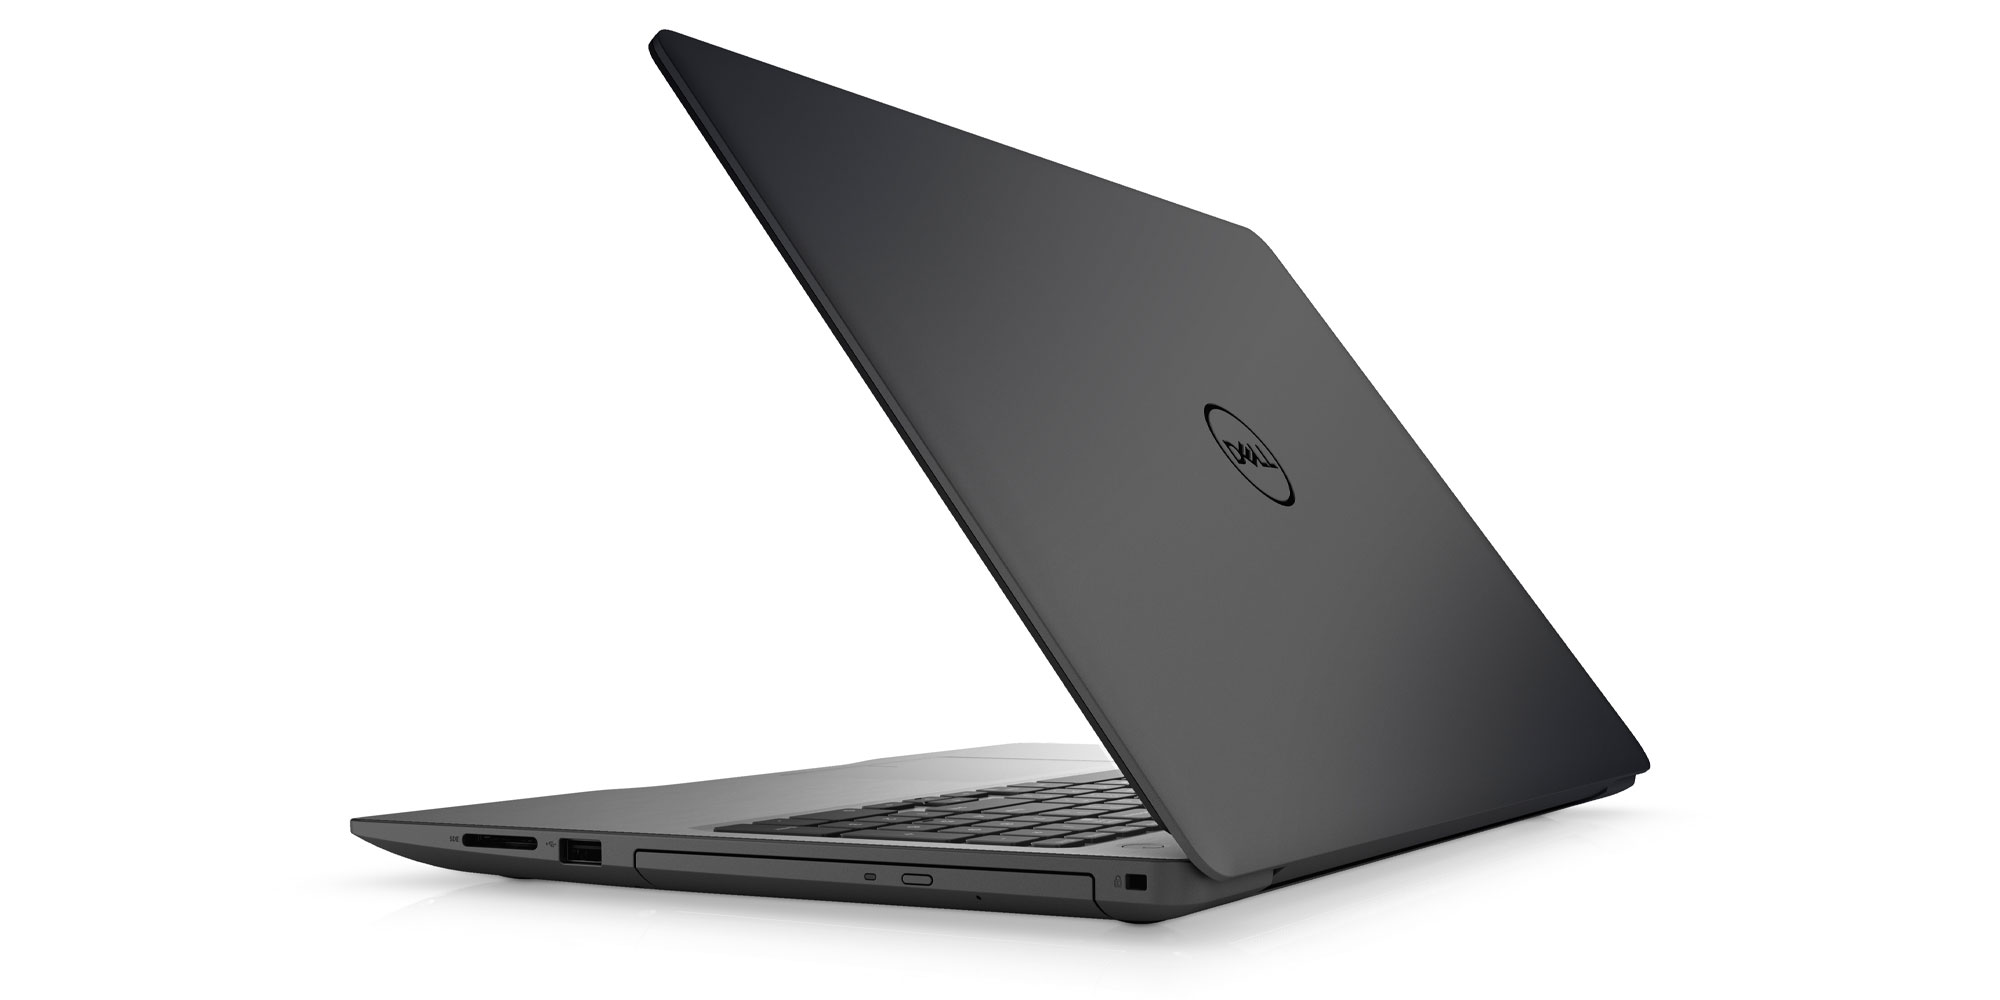 Inspiron 15 5000 series. Dell Inspiron 15 5000. Ноутбук dell Inspiron 15 5000. Dell Inspiron 15 5000 Series + i3. Dell Inspiron 14 7000 2in 1.